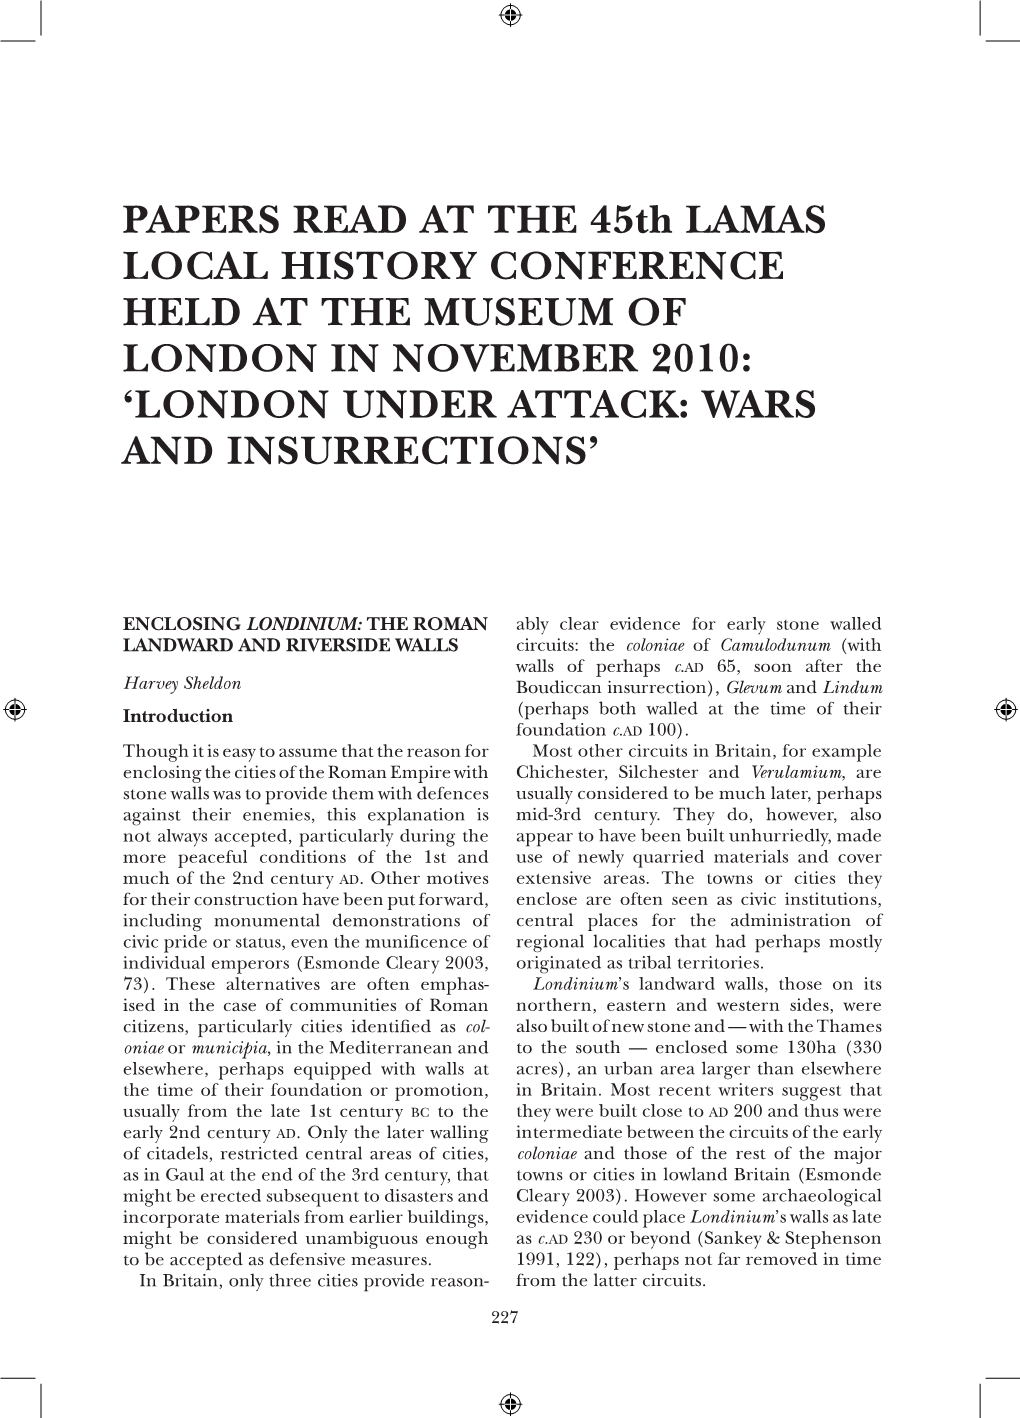 PAPERS READ at the 45Th LAMAS LOCAL HISTORY CONFERENCE HELD at the MUSEUM of LONDON in NOVEMBER 2010: ‘LONDON UNDER ATTACK: WARS and INSURRECTIONS’